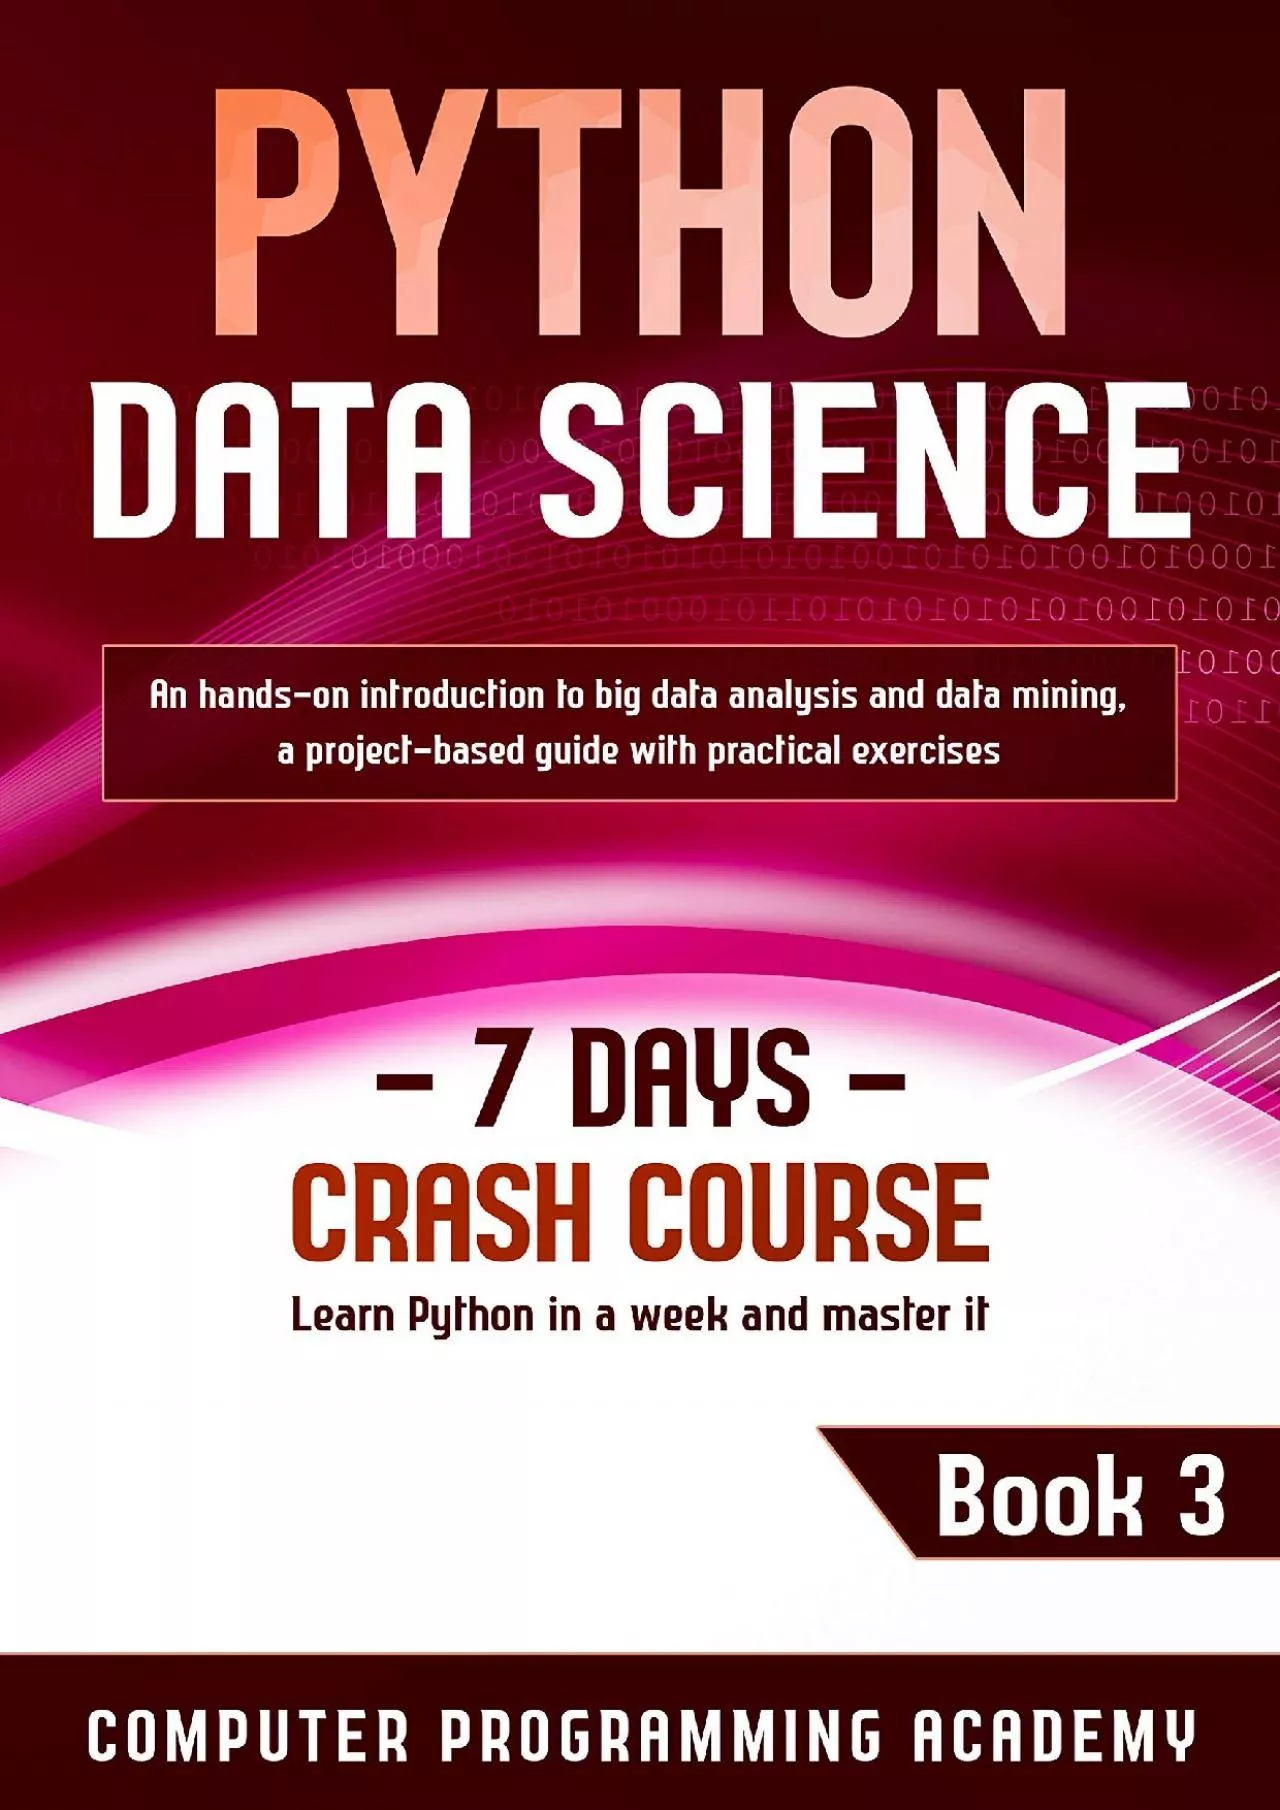 (BOOK)-Python Data Science: Learn Python in a Week and Master It. An Hands-On Introduction